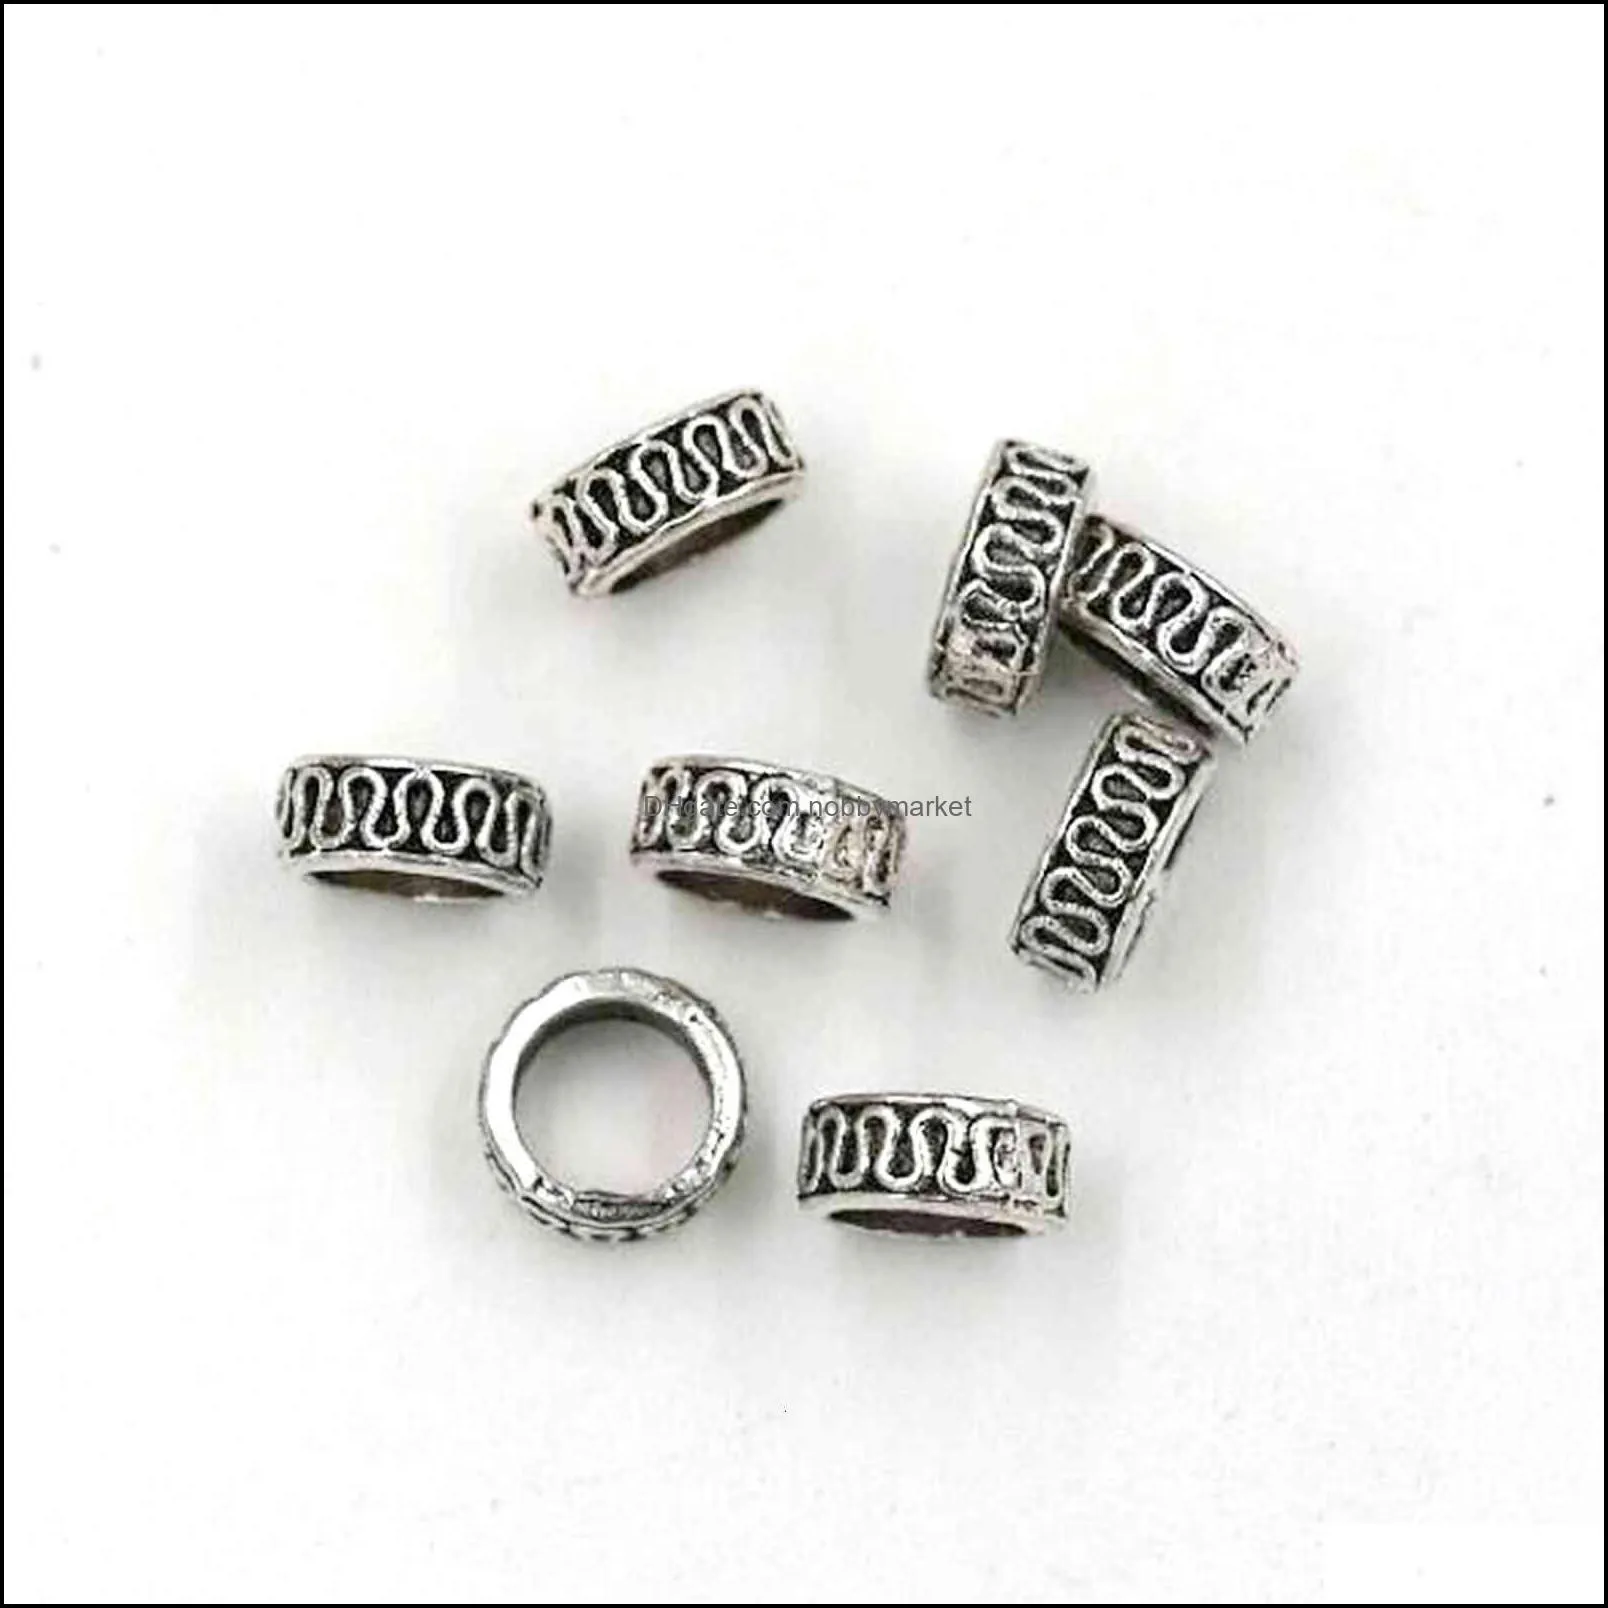 Brand Jewelry Findings 200pcs Antique Silver Alloy Carved Large Hole Spacer Beads For Making Bracelet Necklace DIY Accessories 8*4mm